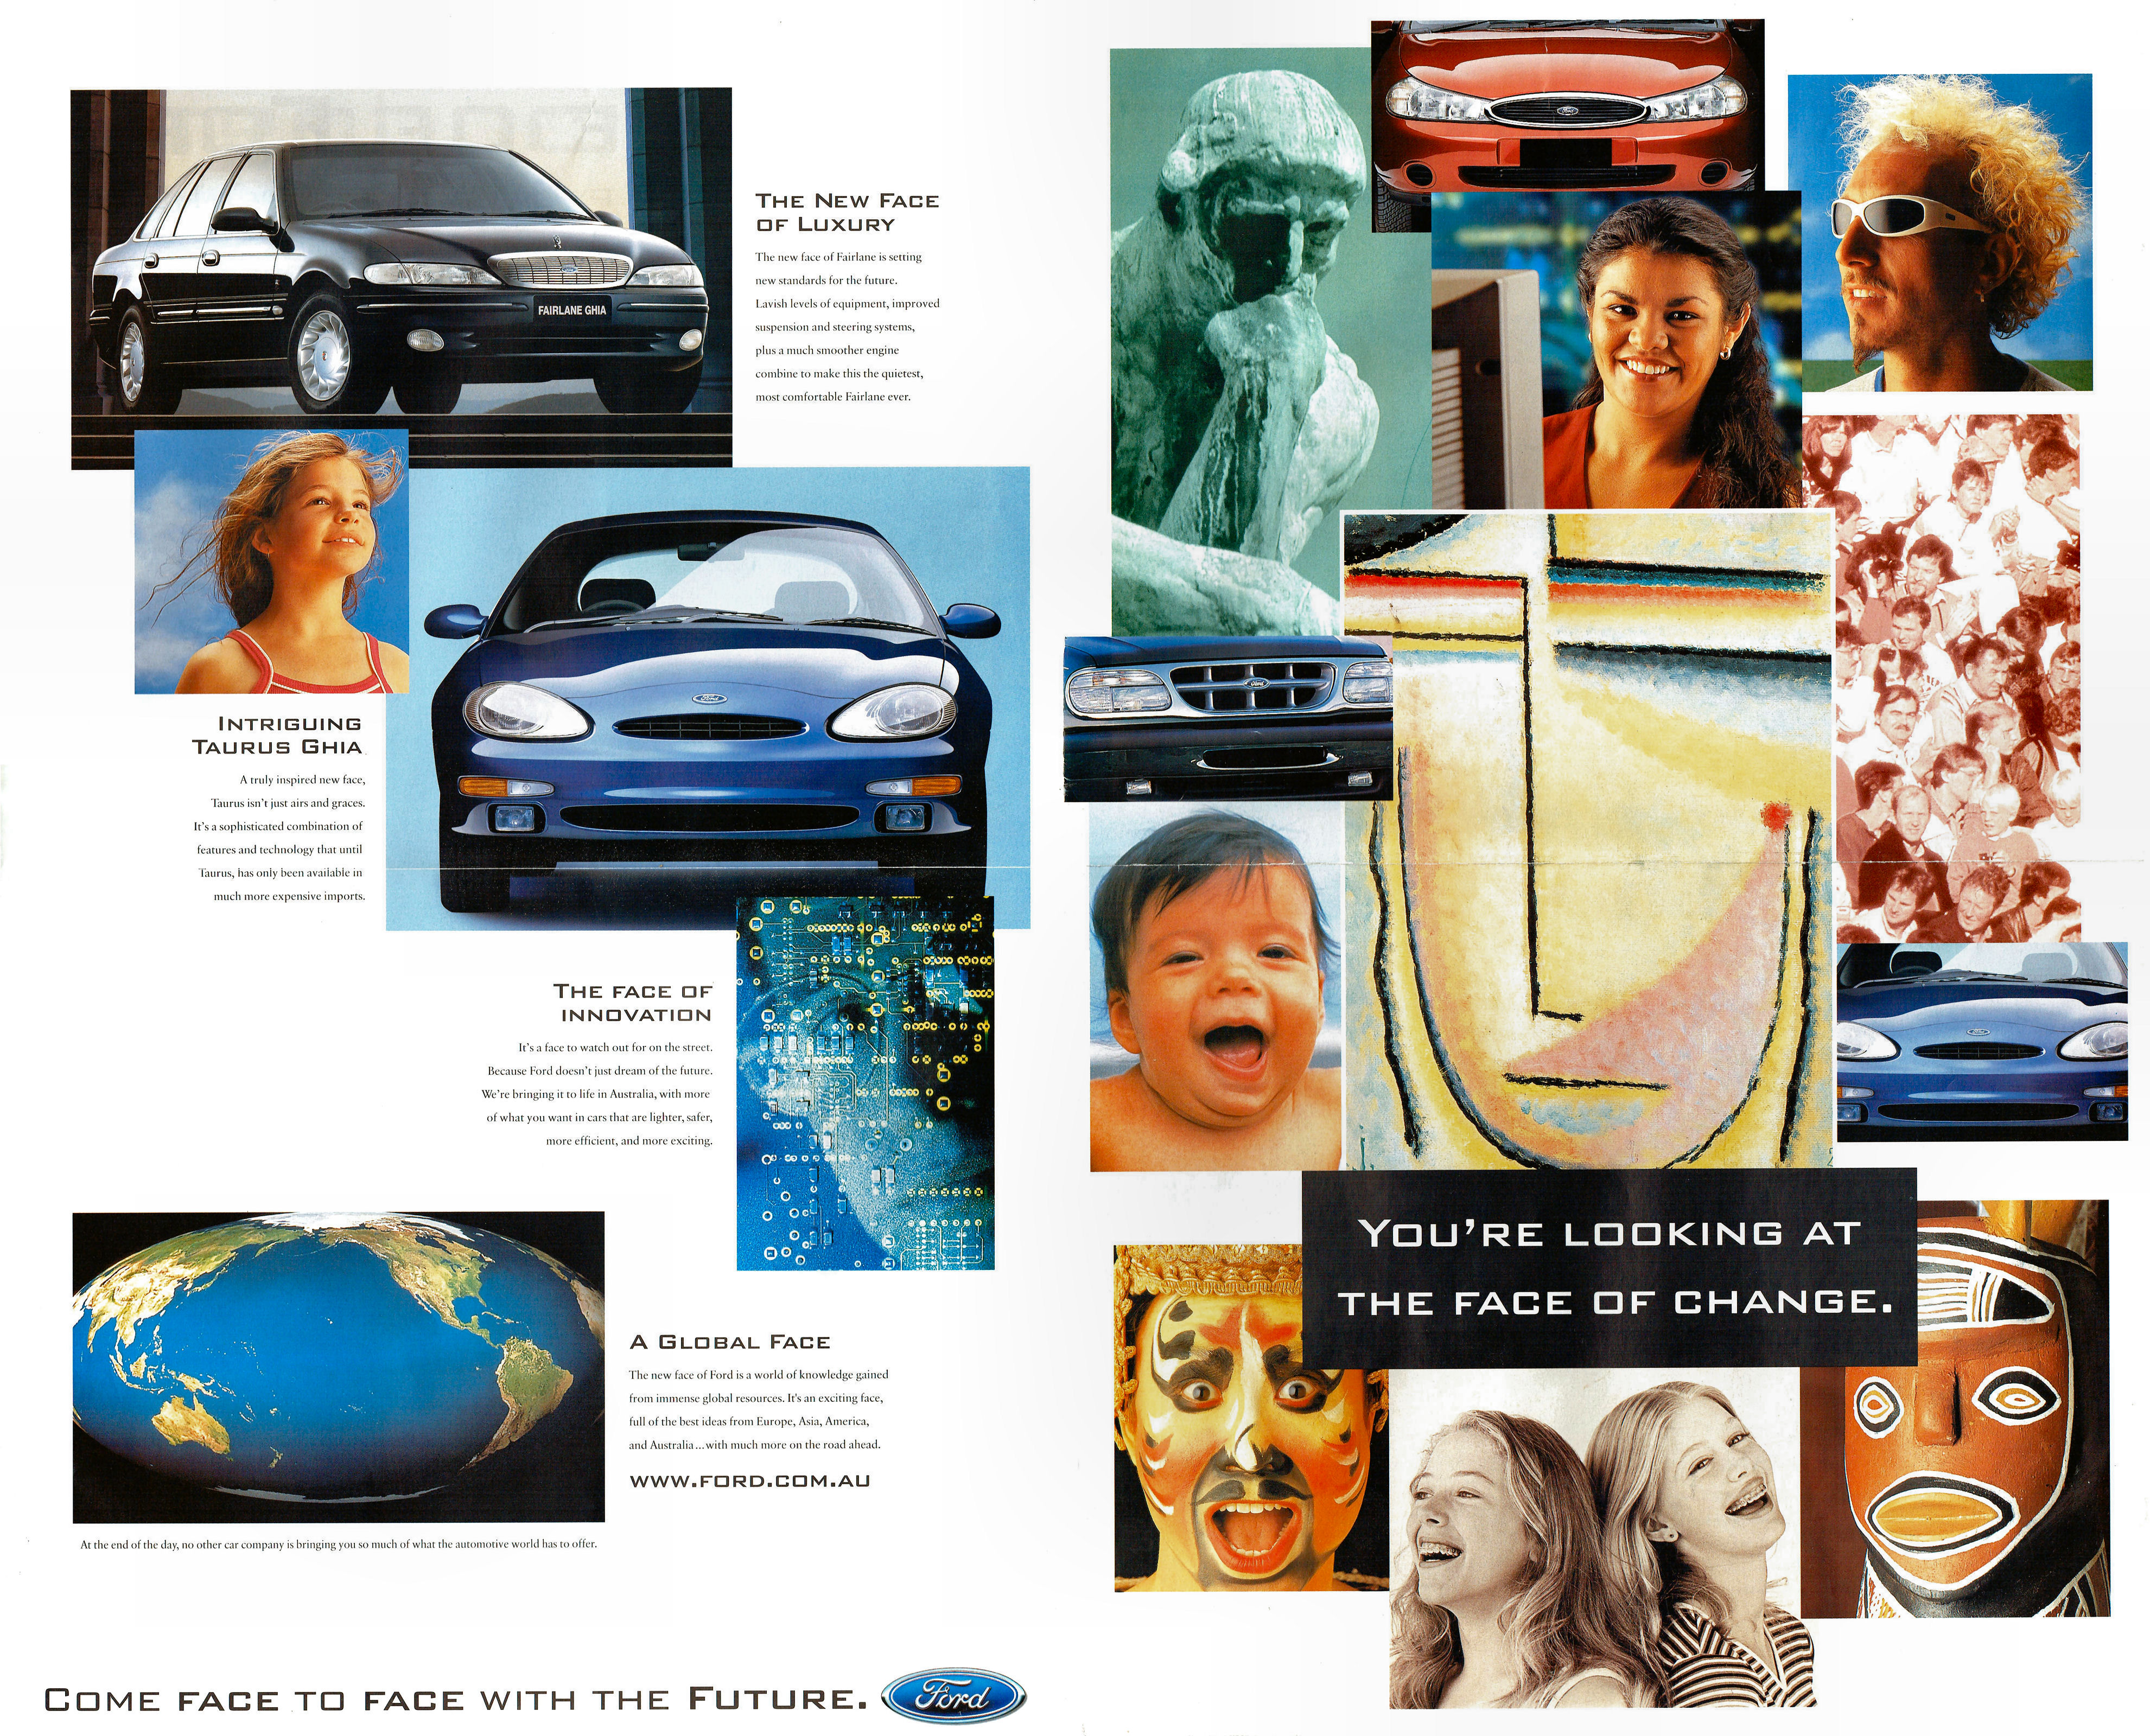 1997 Ford Family Foldout (Aus)-Side A